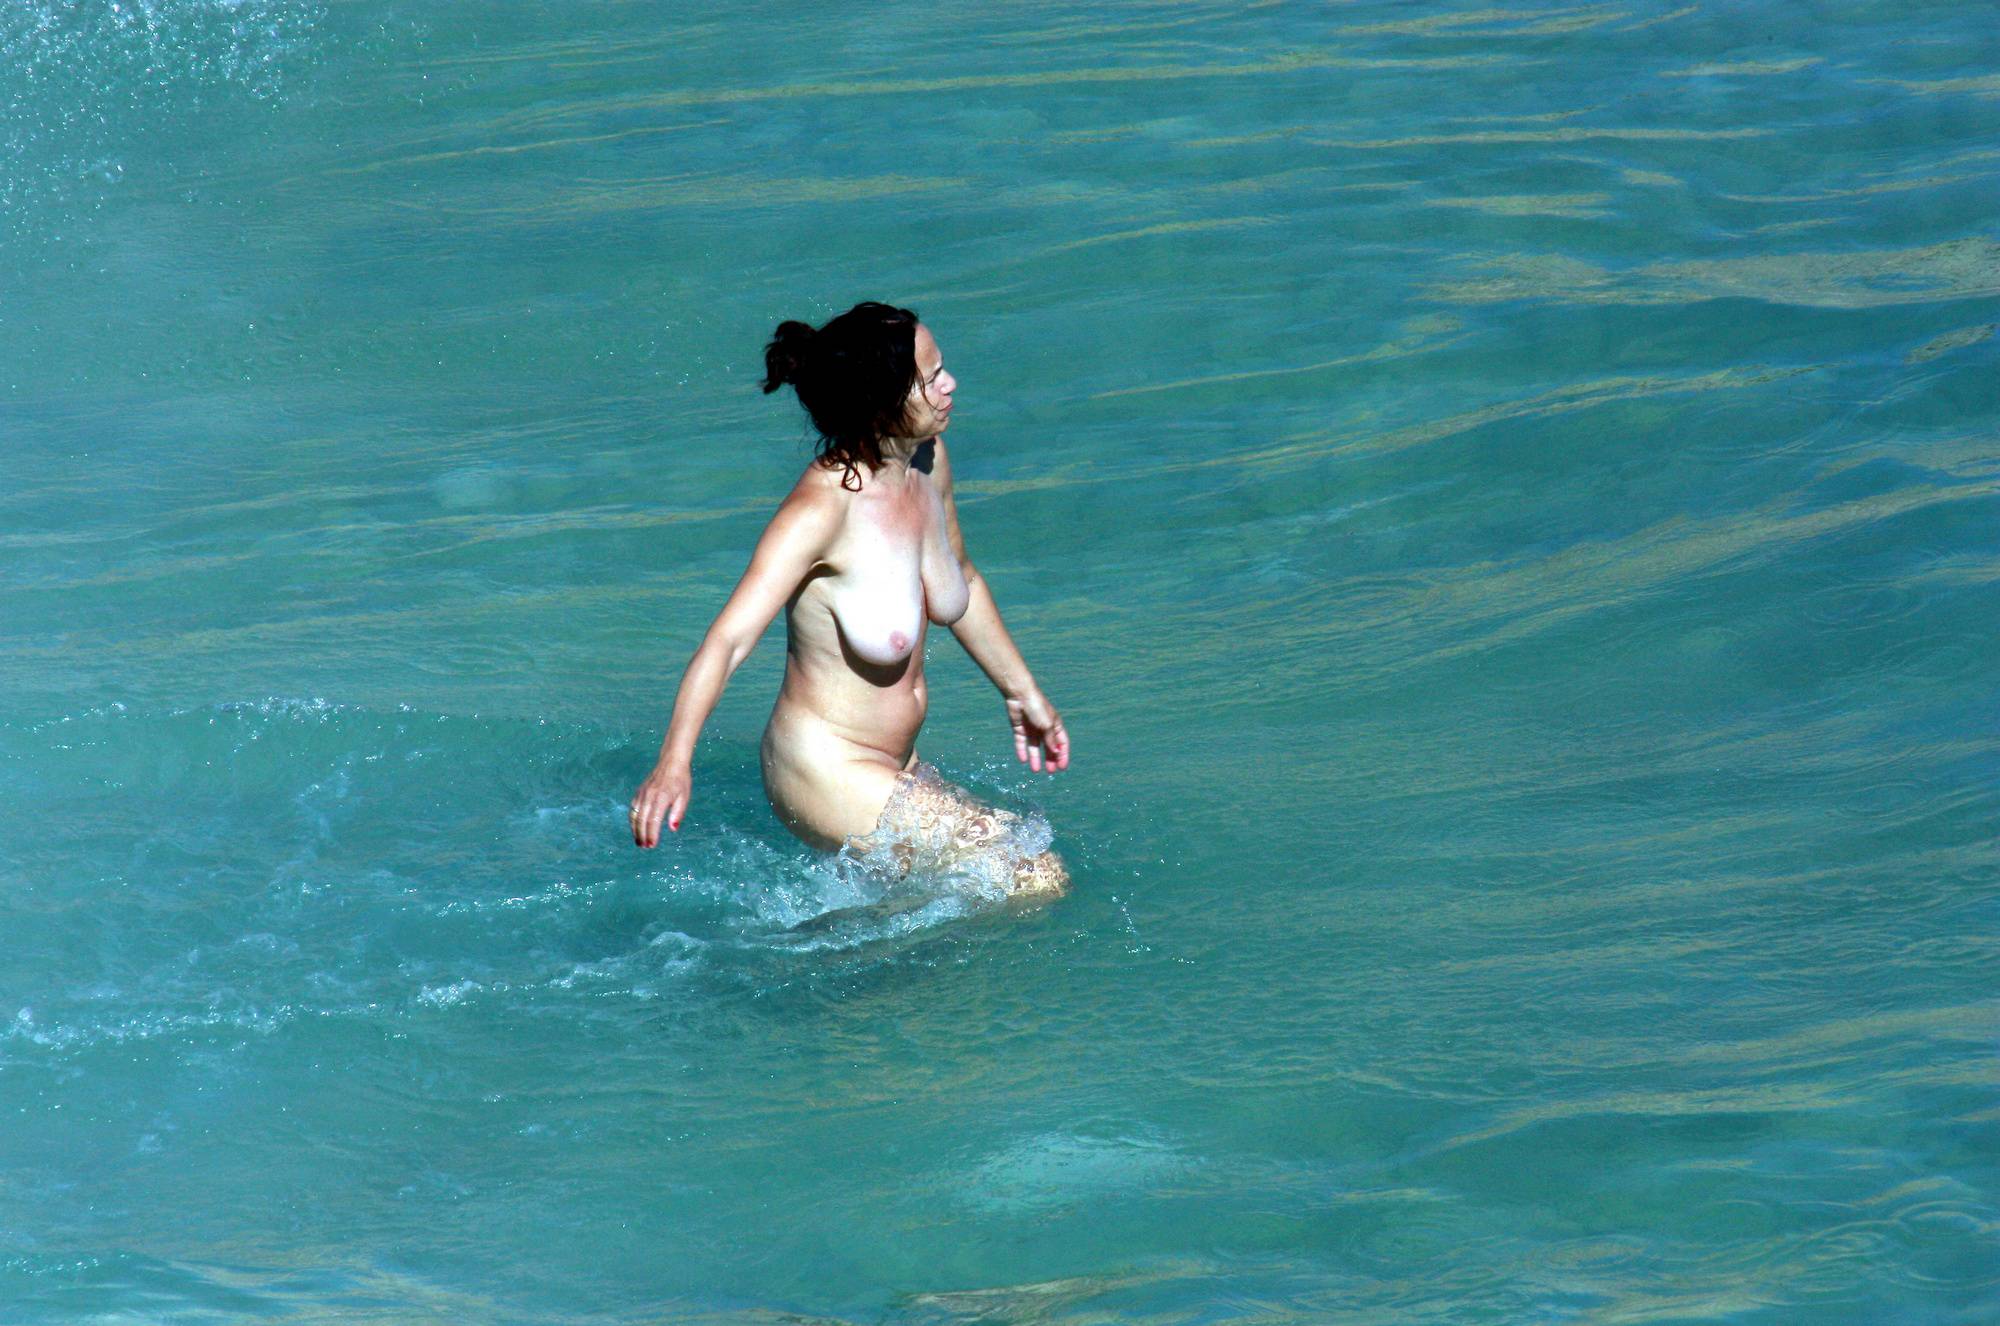 Pure Nudism Pics-Family Beach Water Entry - 2